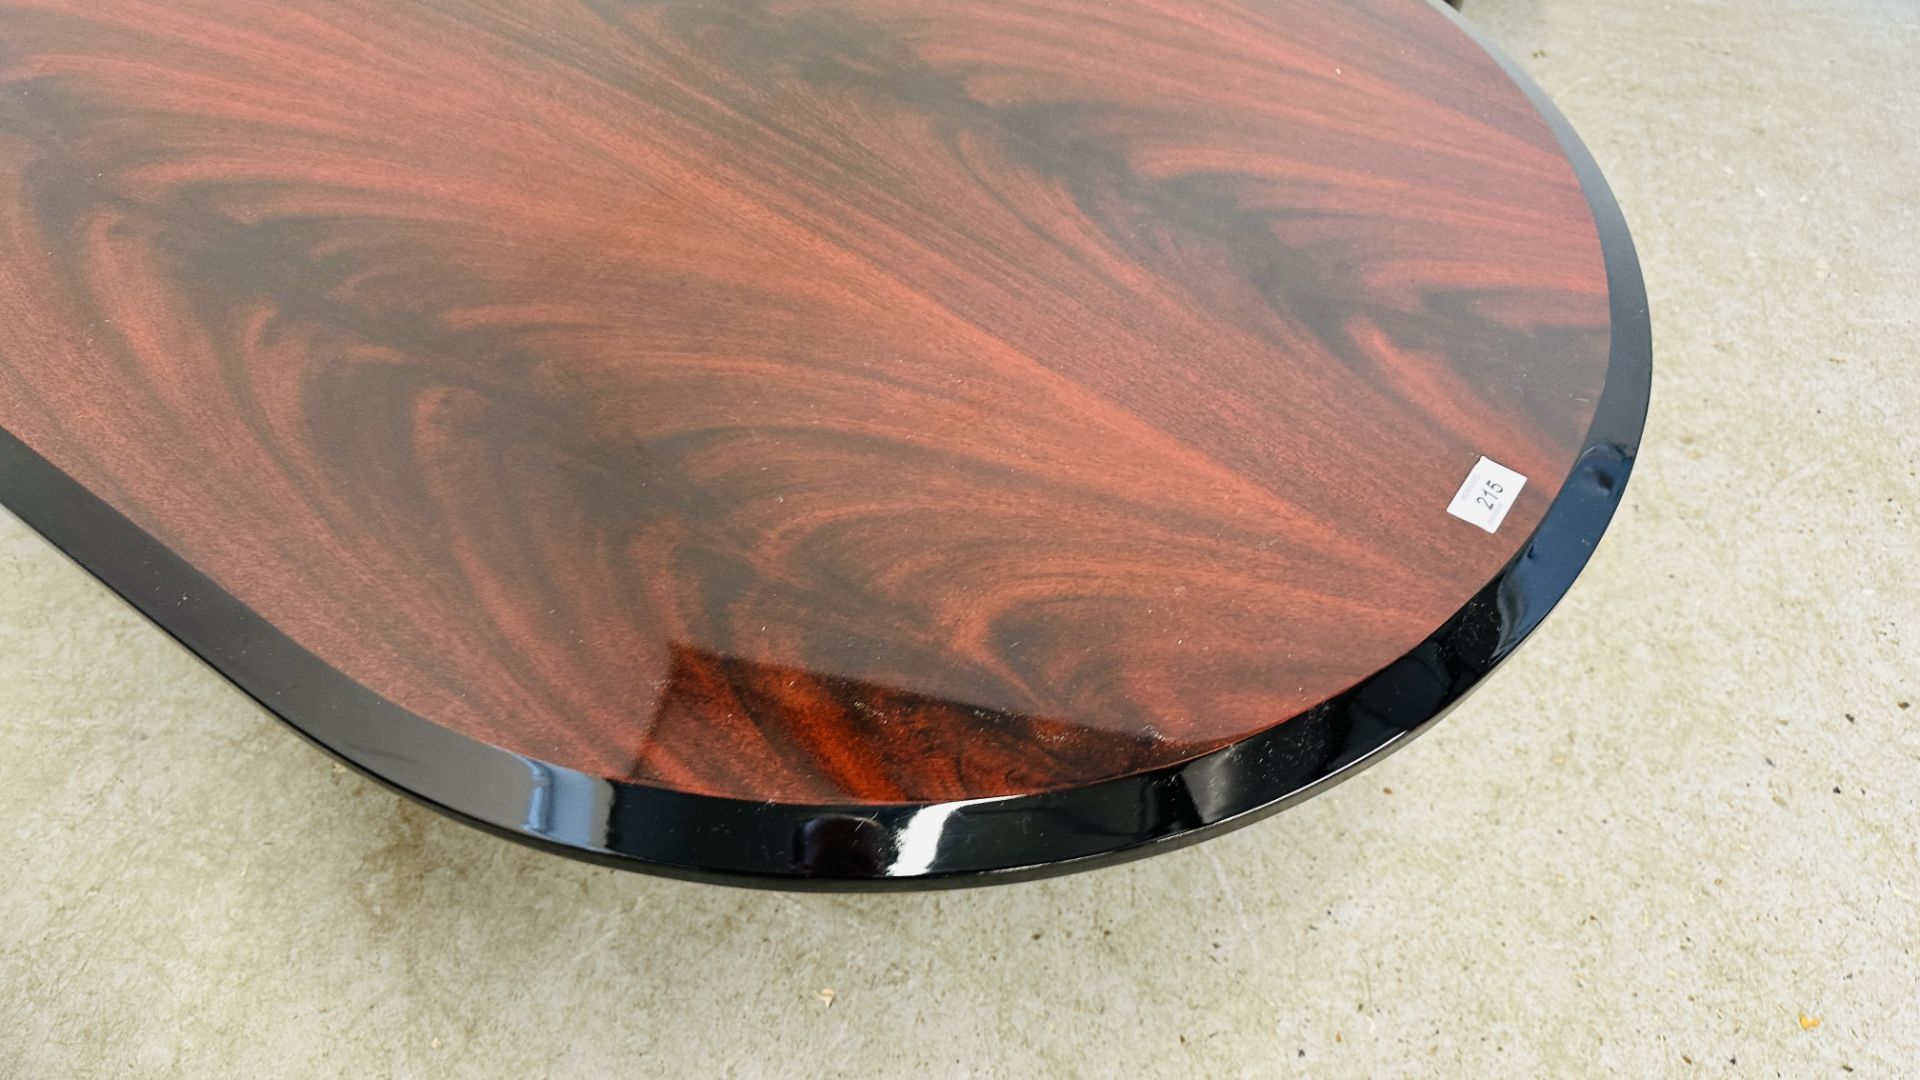 3 MATCHING DESIGN HIGH GLOSS MAHOGANY FINISH COFFEE TABLES INCLUDING A PAIR OF CIRCULAR AND 1 OVAL. - Image 7 of 16